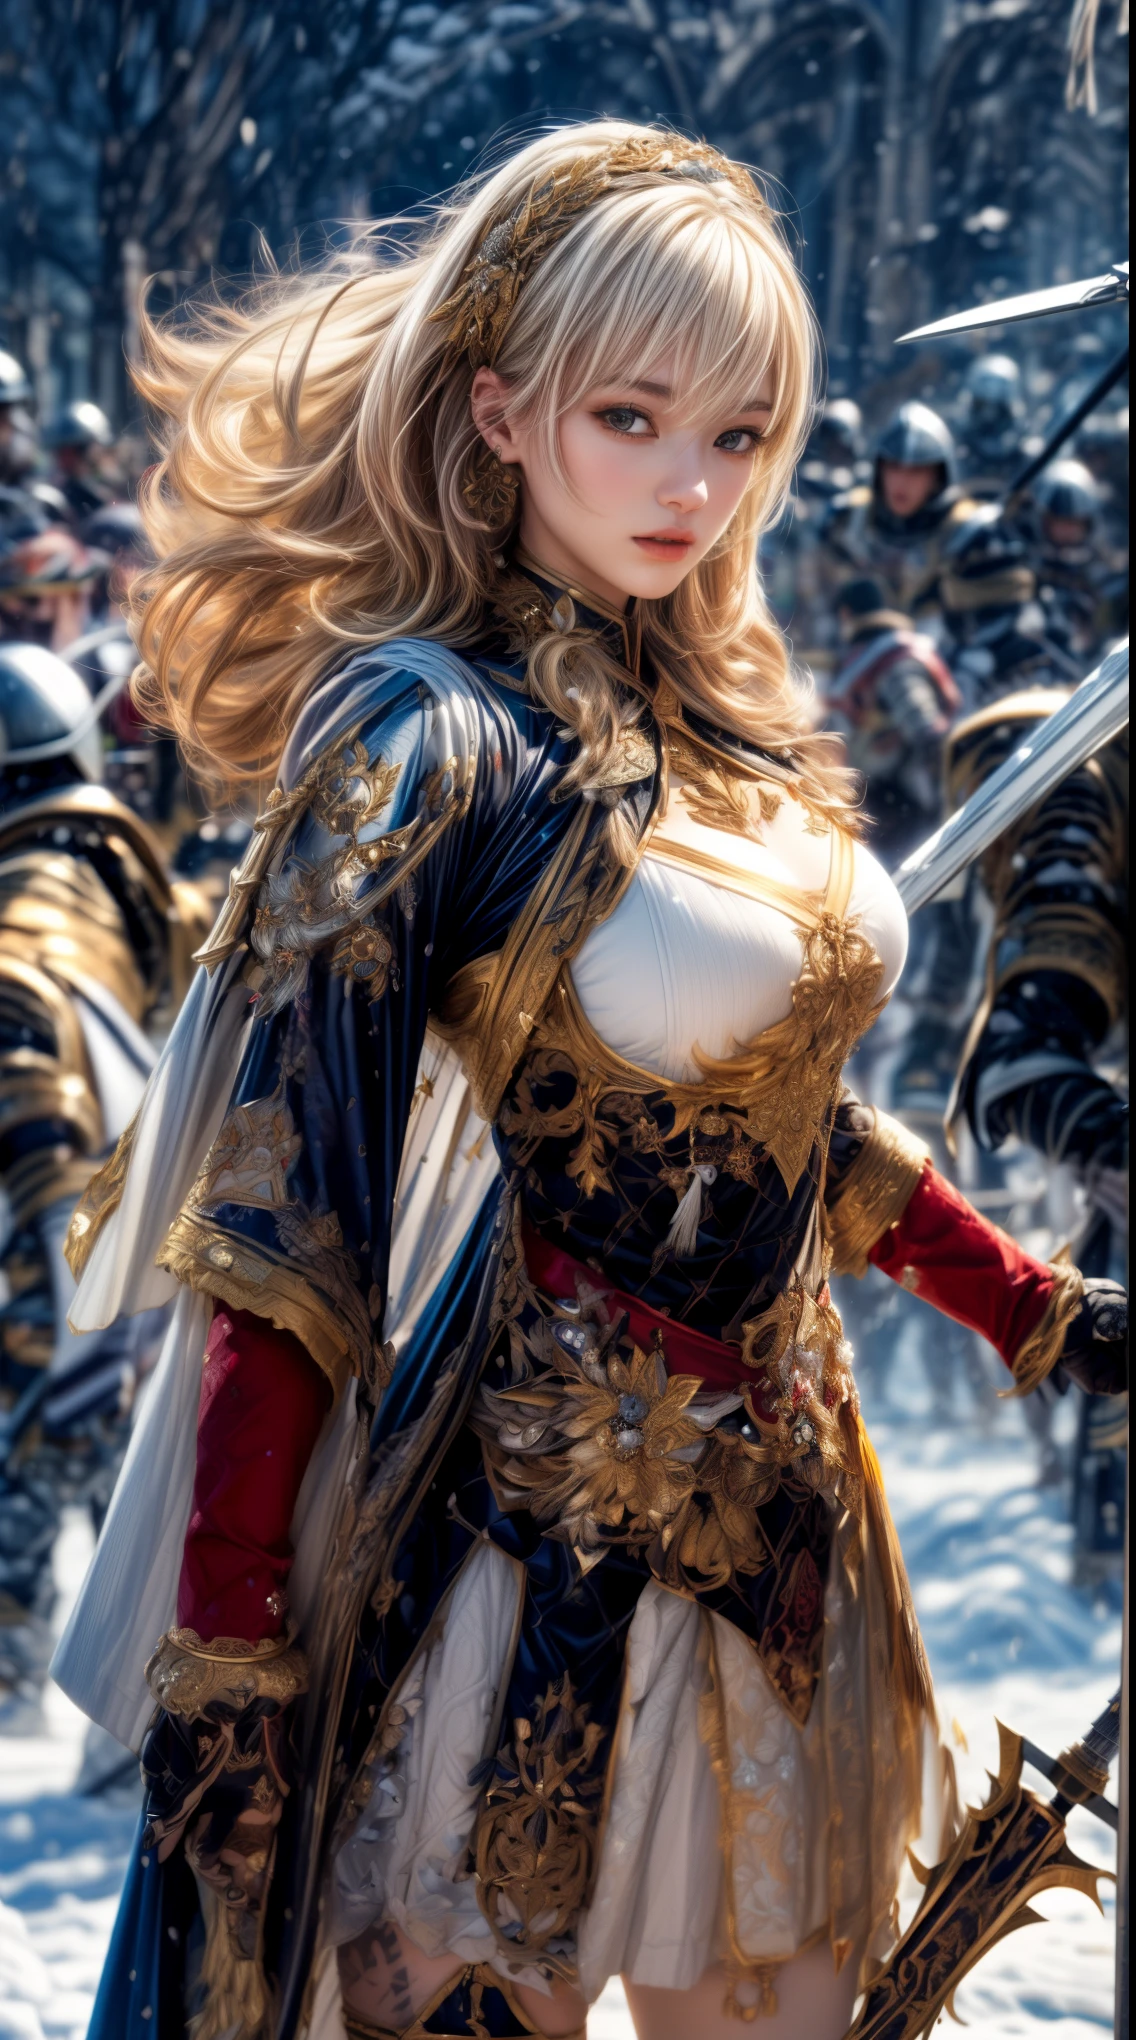 Very beautiful woman、Slender women、(Detailed face)、Realistic Skin、((Paladin)), ((Pearl White Armor))、((((A black armor with extremely detailed and intricate decoration.:1.1))))、((Delicate photo))，(Girl Astepeace RAW Photo Details:1.25), (highest quality:1.6), (超A high resolution:1.5), (Realistic:1.75), 8K resolution, Canon EOS R5, 50mm, Absurd, Super detailed,Cinema Lighting,((Fightfield))、((Fight))、(((White skirt with embellishments)))、Thigh-high socks、Shingard、((blonde))、((Curly Hair))、((Drill Hair))、((Short hair with bangs and wavy hair,))、Get a six pack、Cape、Beautiful Armor、(((Has a huge weapon)))、(In combat)、The wind is blowing、((Symmetrical armor))、((((Blizzard))))、(((Lead a large group of knights:1.2)))、banner、Armor with a snow and ice motif、(((Battle Scenes)))、((Browsing Caution:1.1))